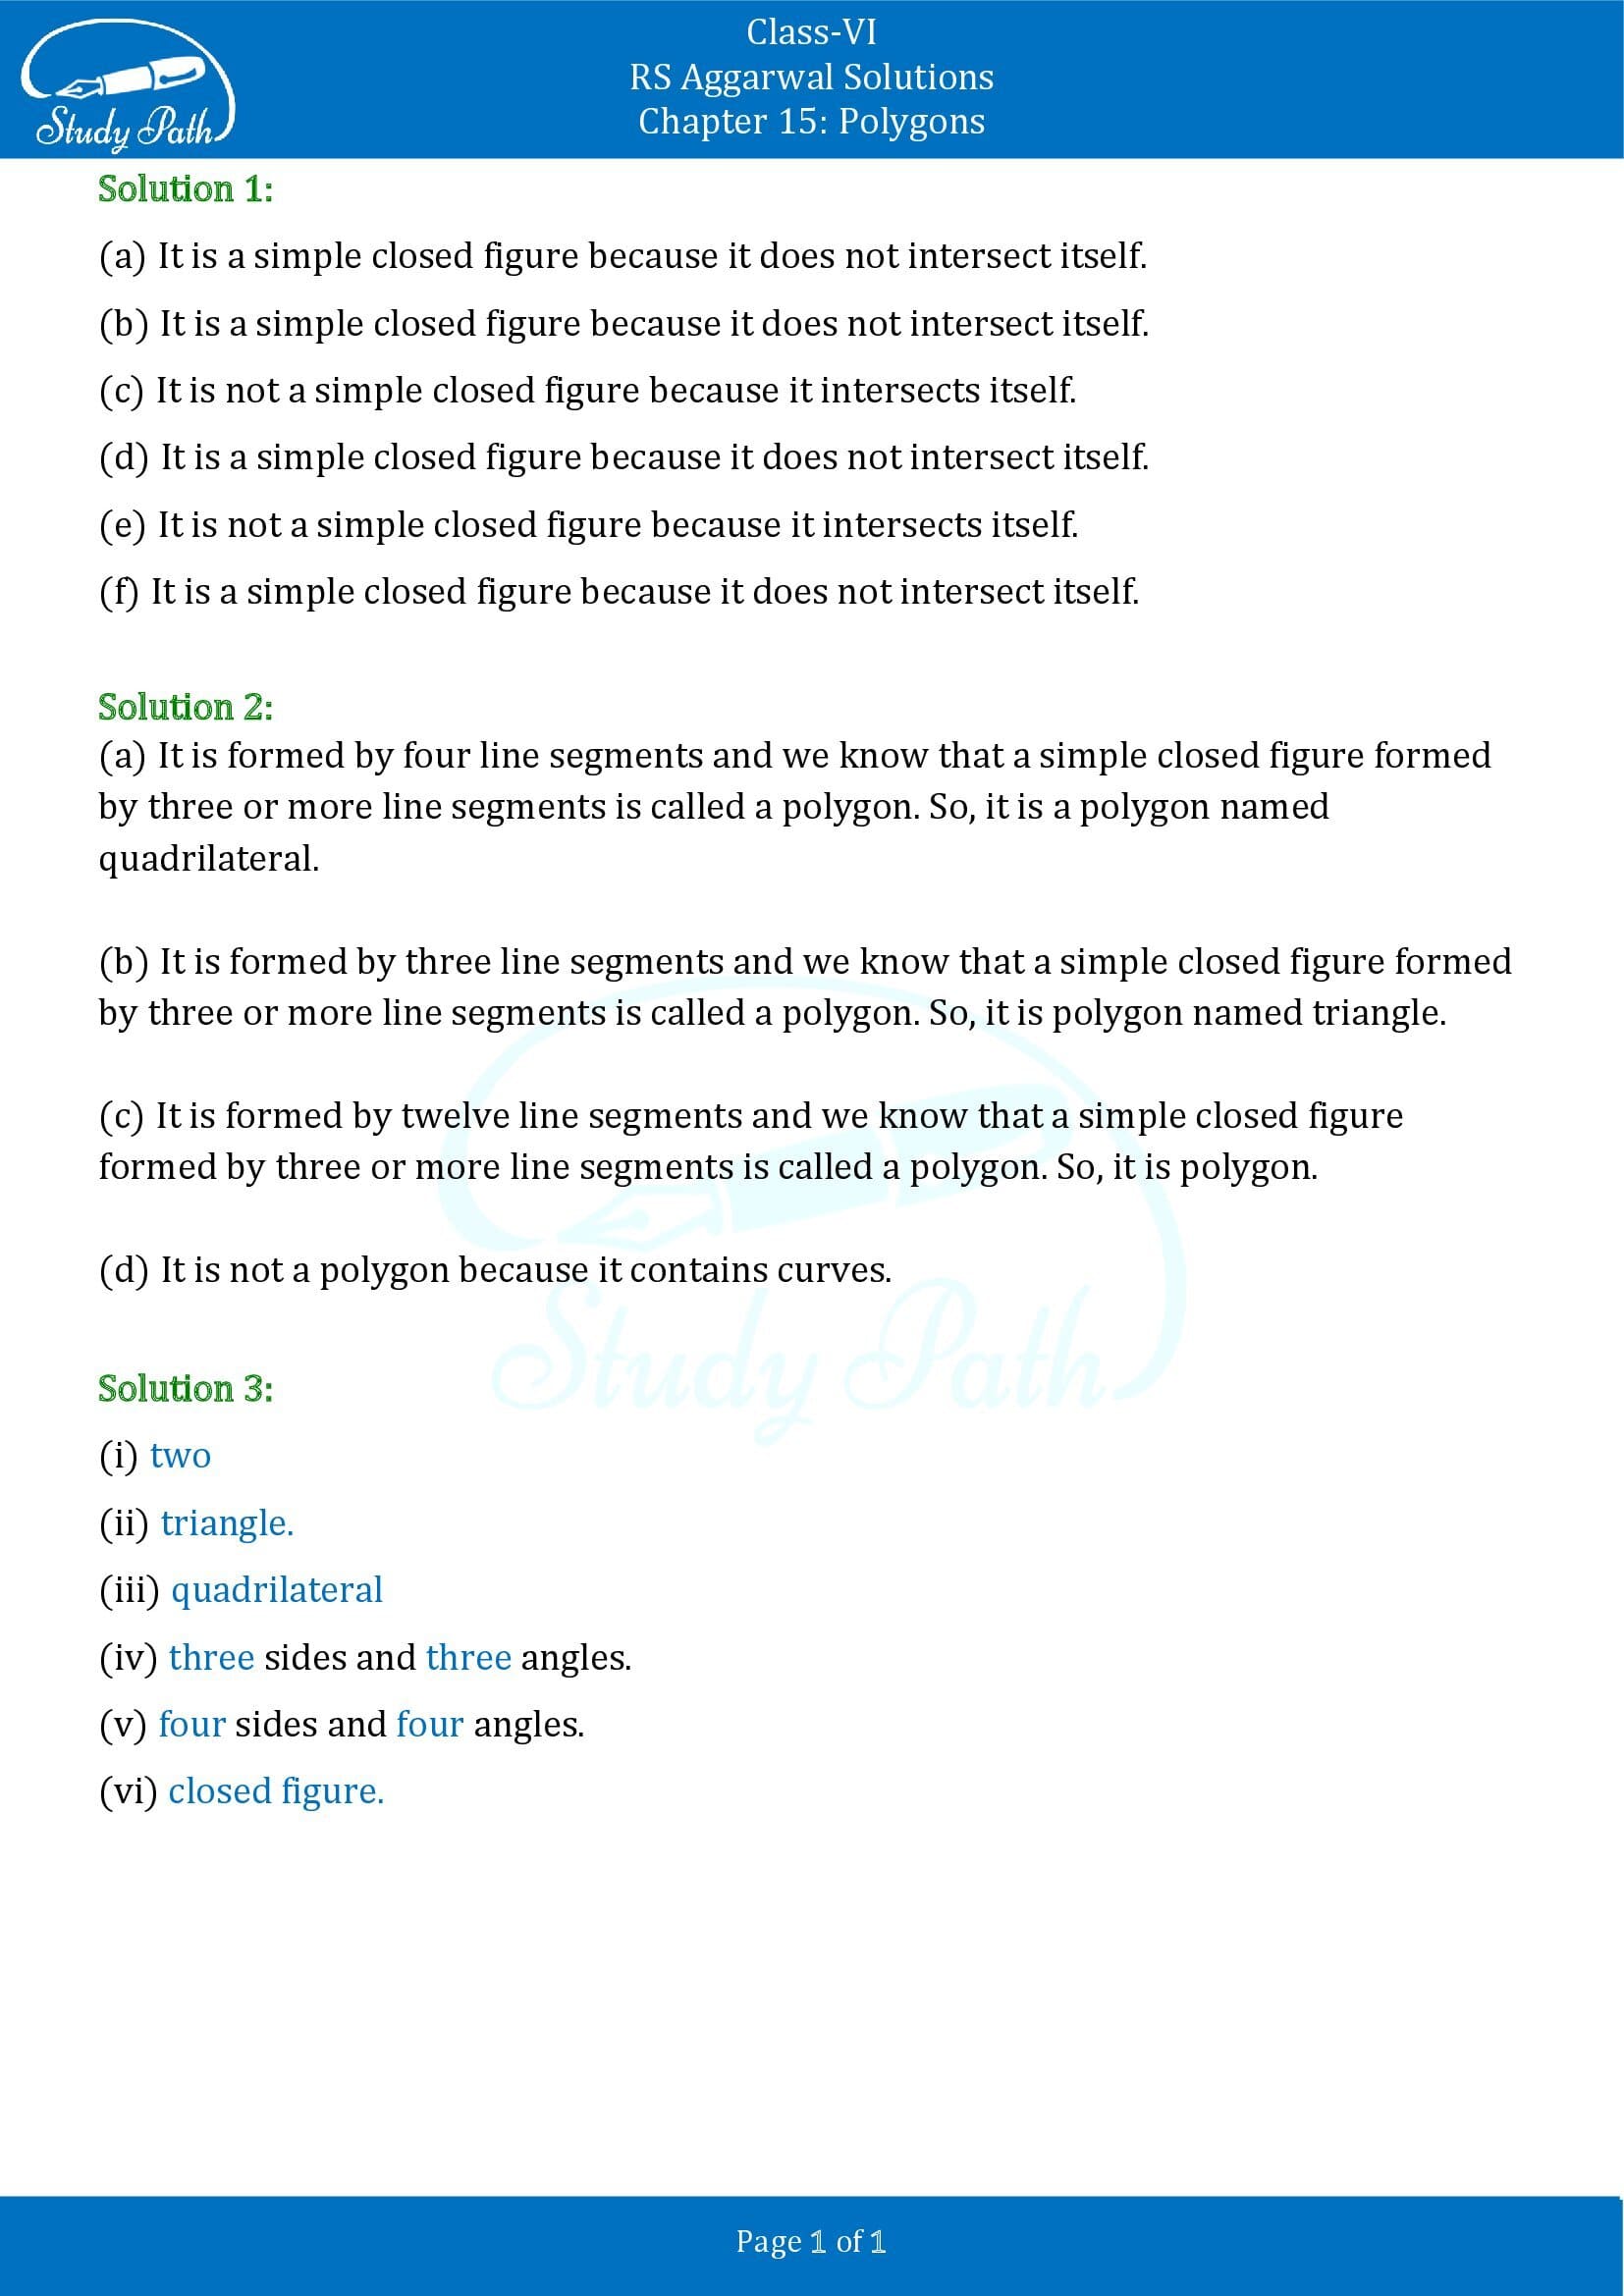 RS Aggarwal Solutions Class 6 Chapter 15 Polygons 0